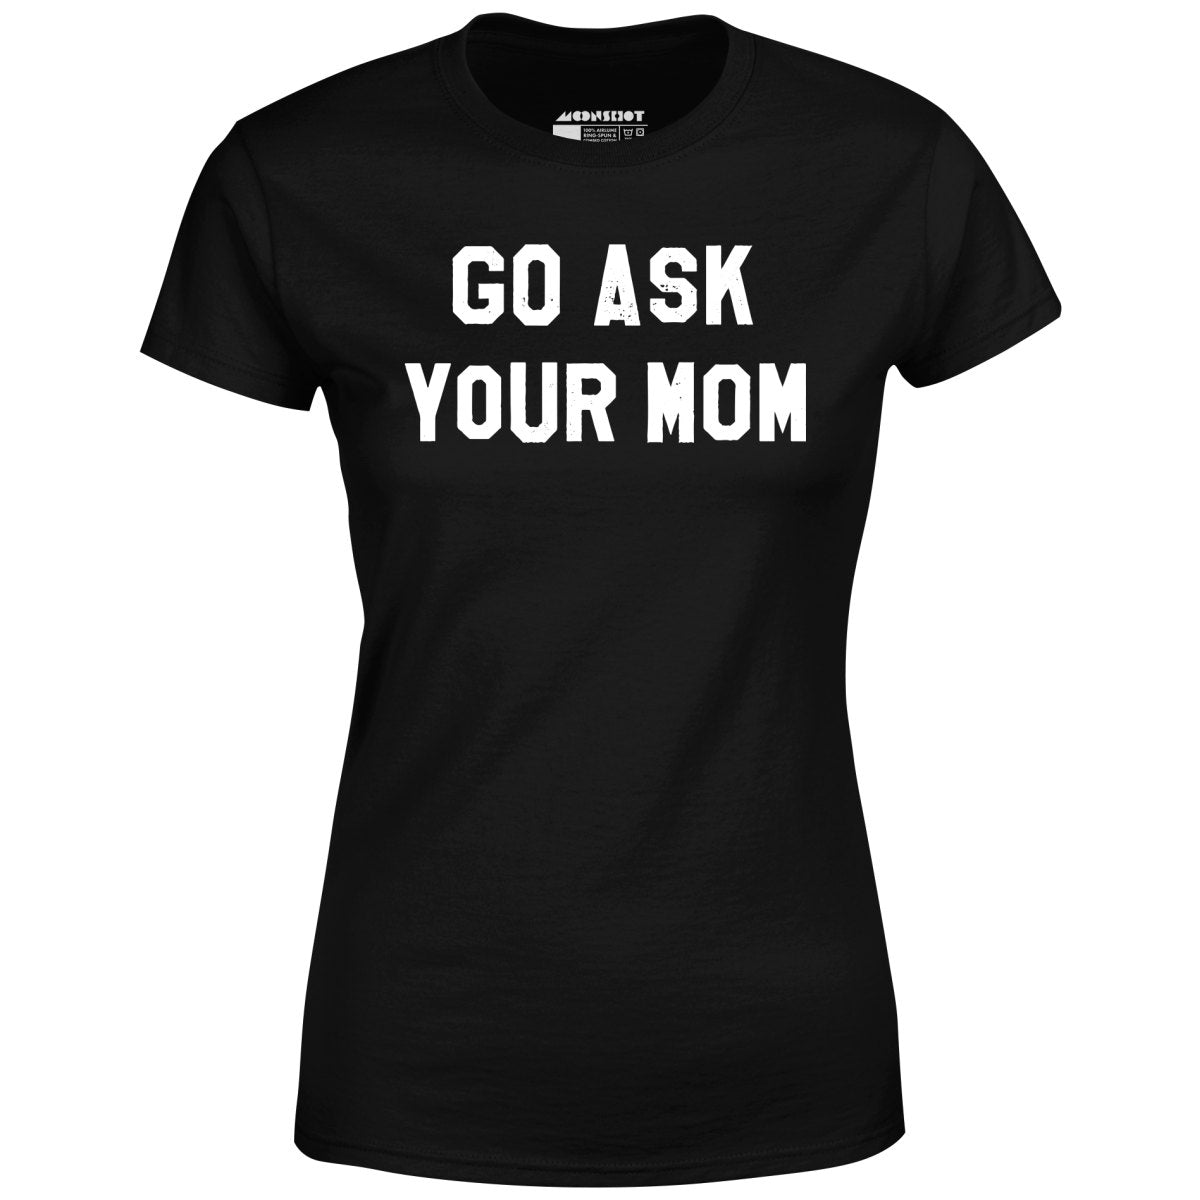 Go Ask Your Mom - Women's T-Shirt